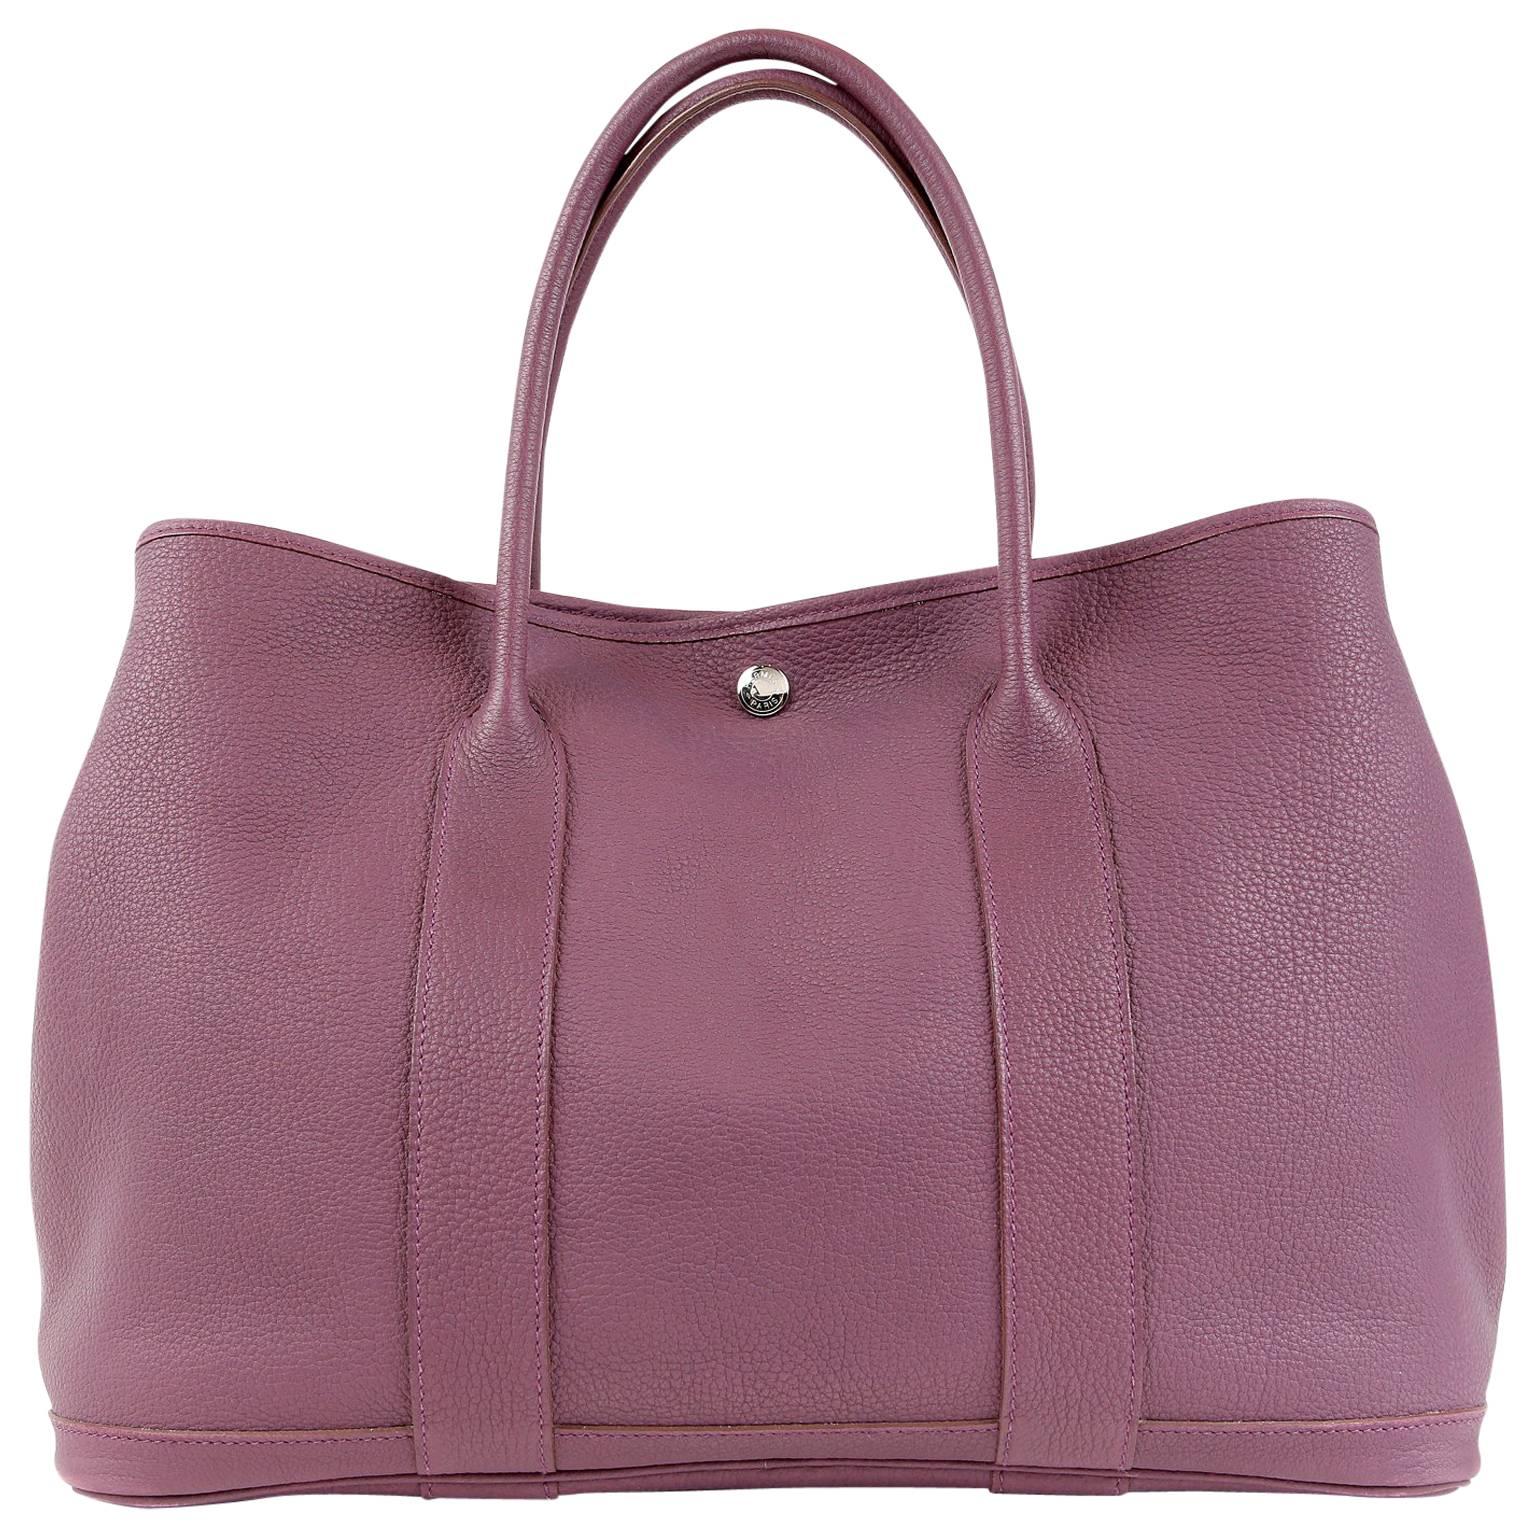 Hermès Violet All Leather Garden Party Tote- Togo, PHW For Sale